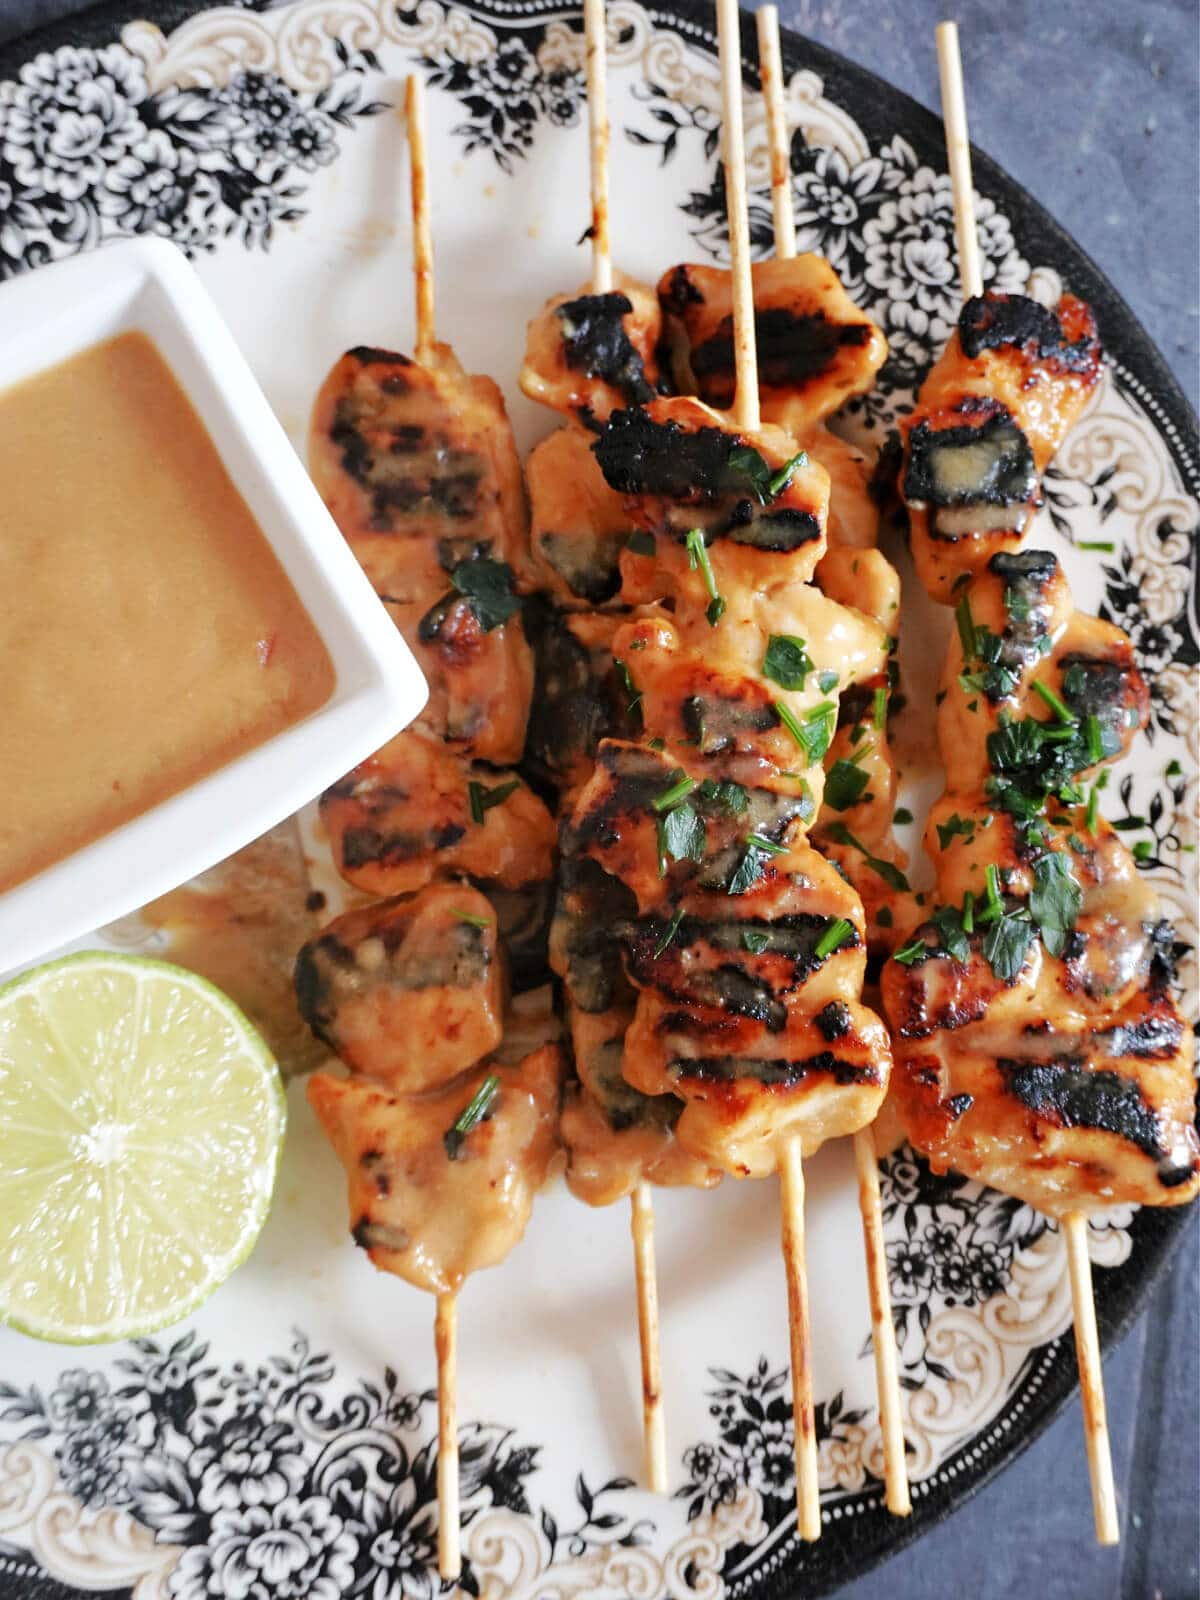 Overhead shot of grilled chicken skewers, a small bowl of peanut butter sauce, and half a lime on a white plate.